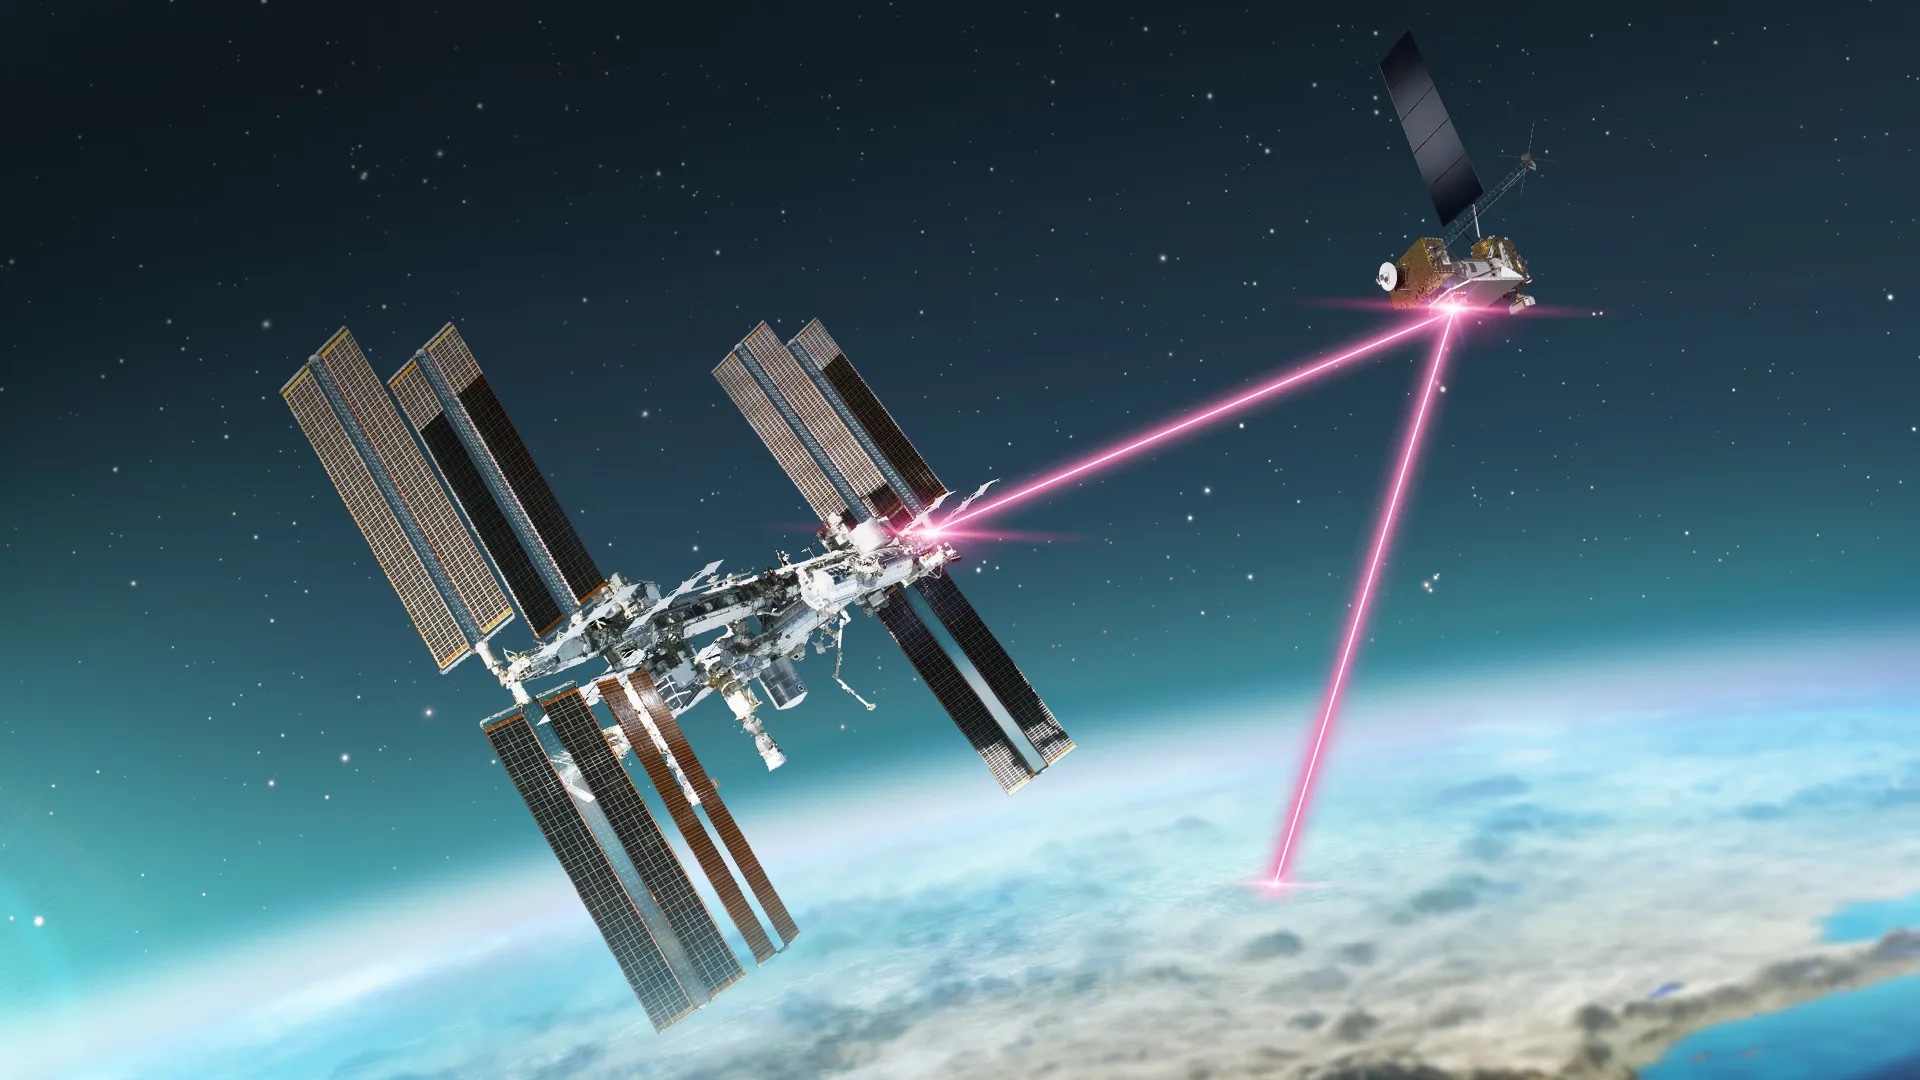 A laser communications payload communicates with a satellite over laser signals.